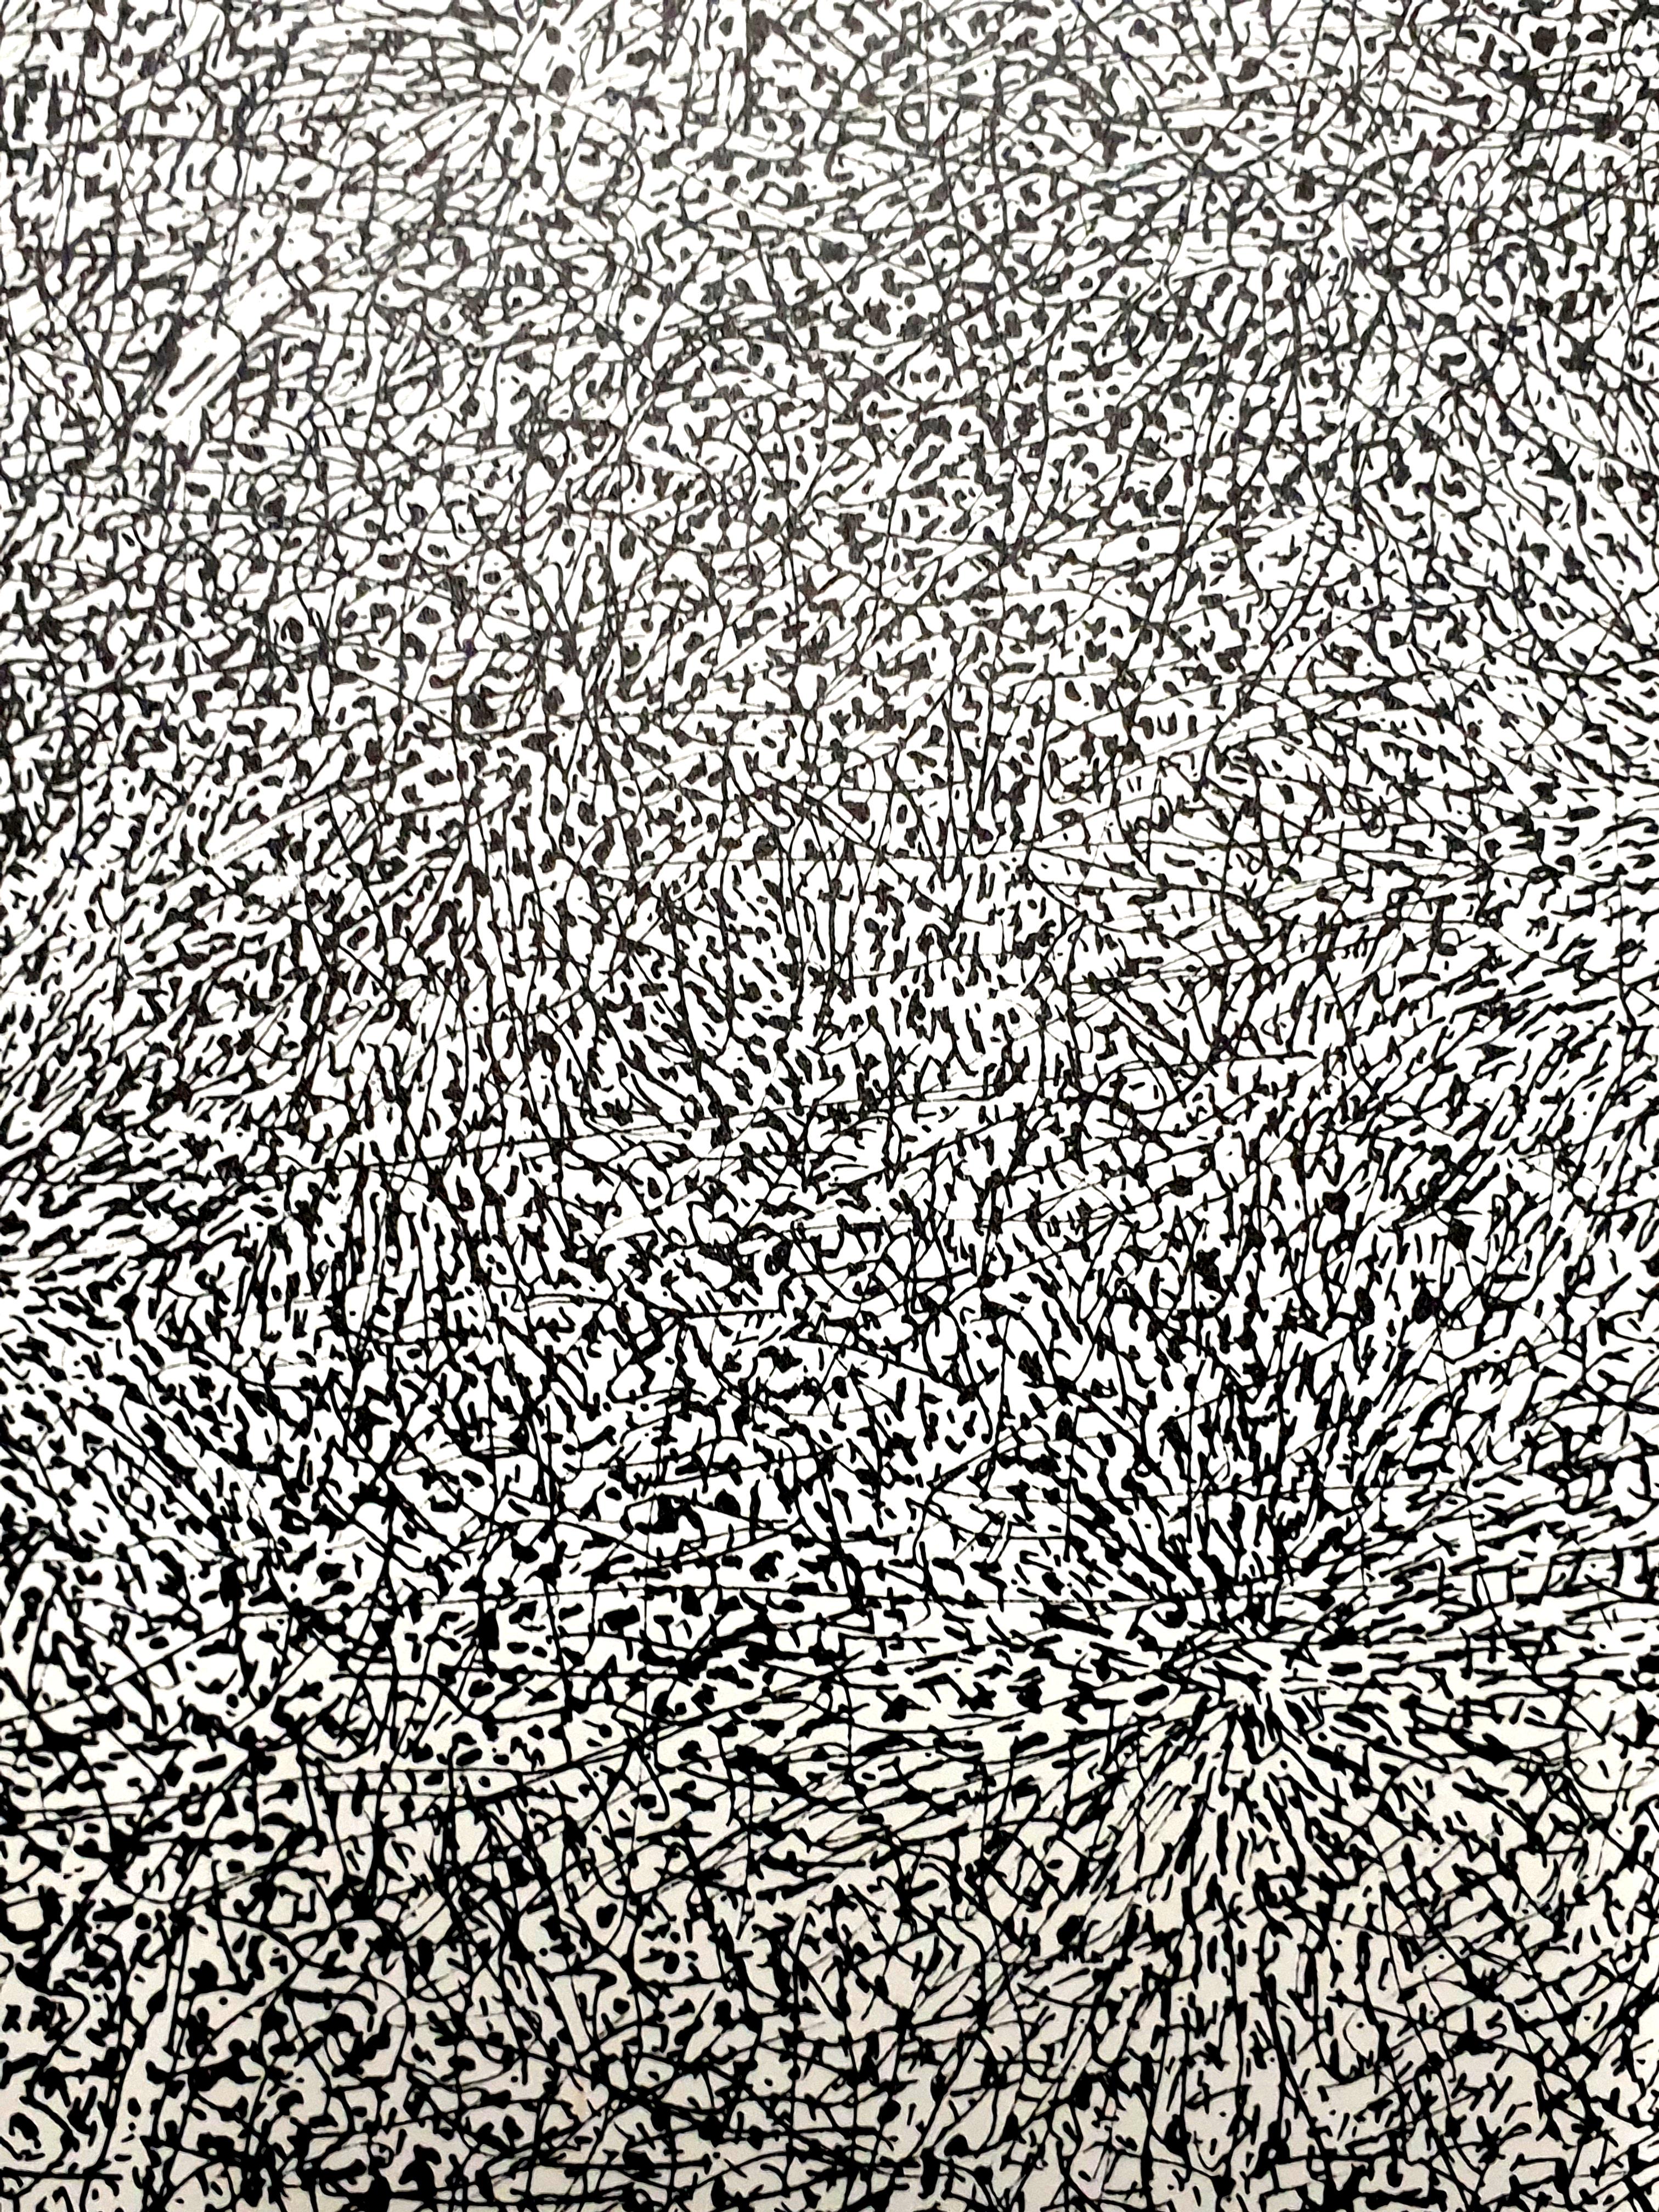 after Jean Dubuffet - Meadow - Lithograph
1960
Dimensions: 32 x 25 cm 
Edition: G. di San Lazzaro.
From the art review XXème siècle
Unsigned and unumbered as issued